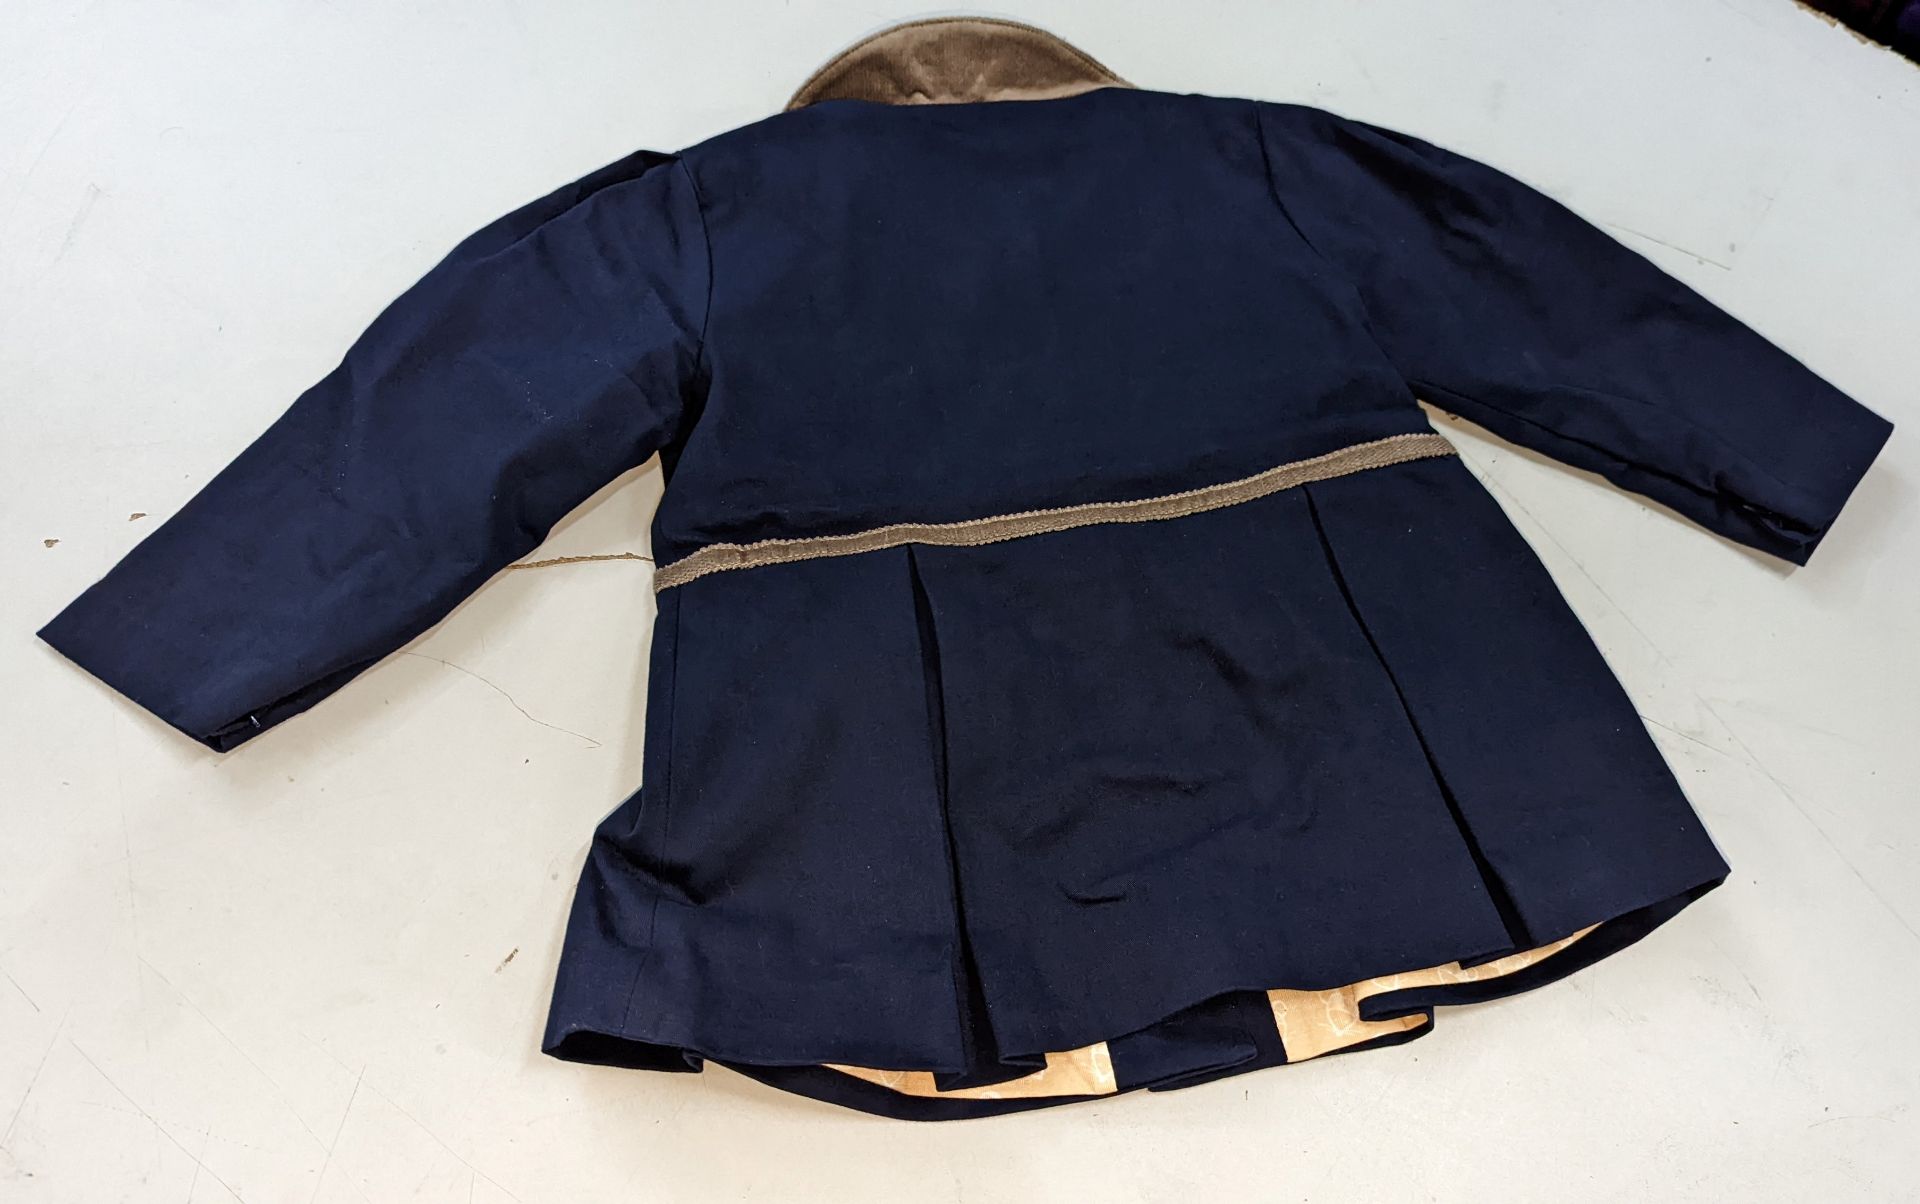 20 off Mosé Baby girl's dress coats in navy, with skirted design, velvet collar and waist trim plus - Image 11 of 11